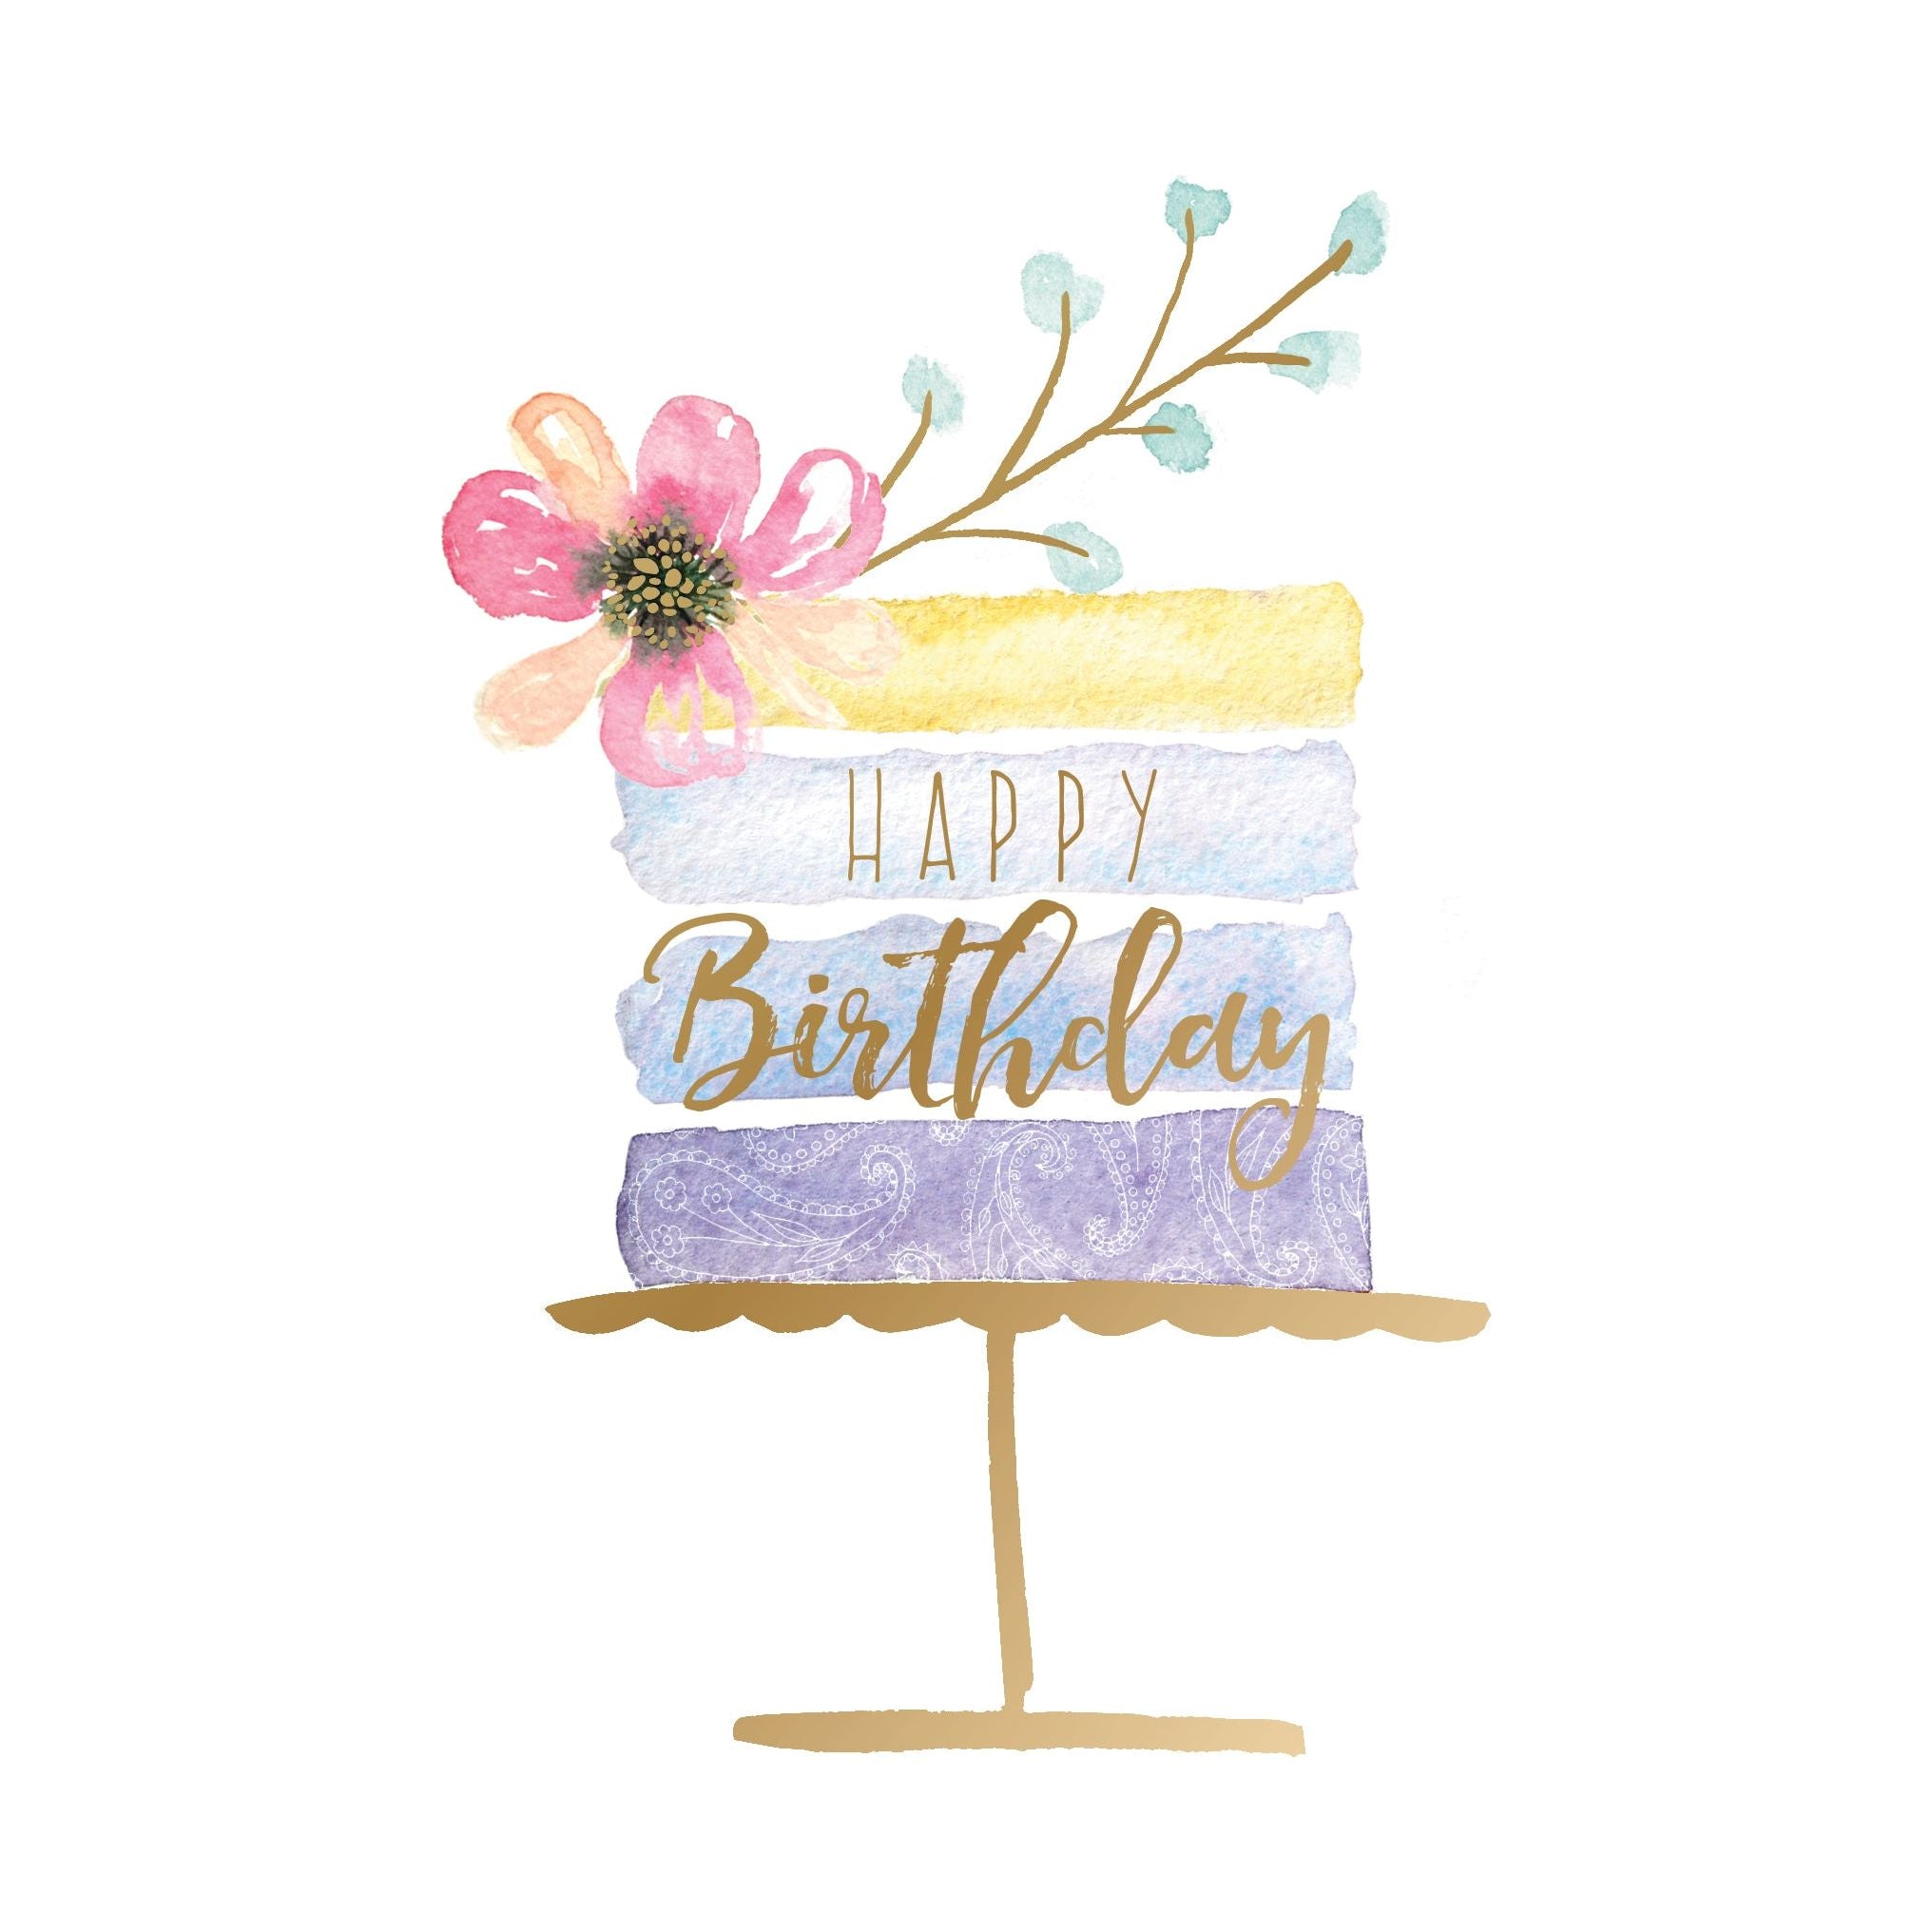 Birthday Card Watercolor Striped Cake - Cardmore